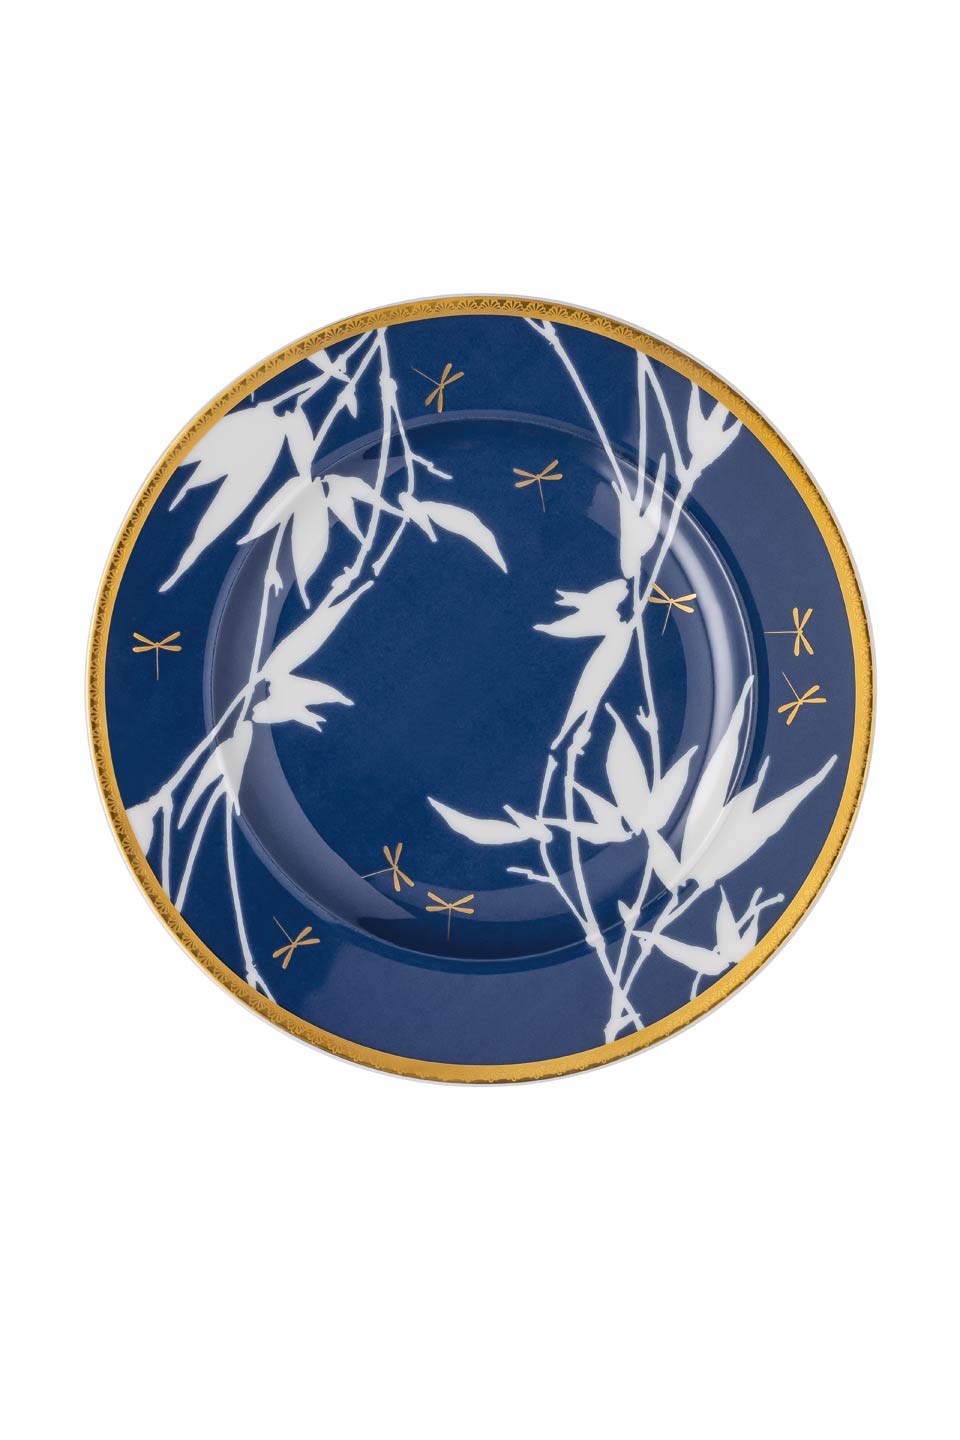 Heritage Turandot Bread &amp; Butter Plate – 7 in